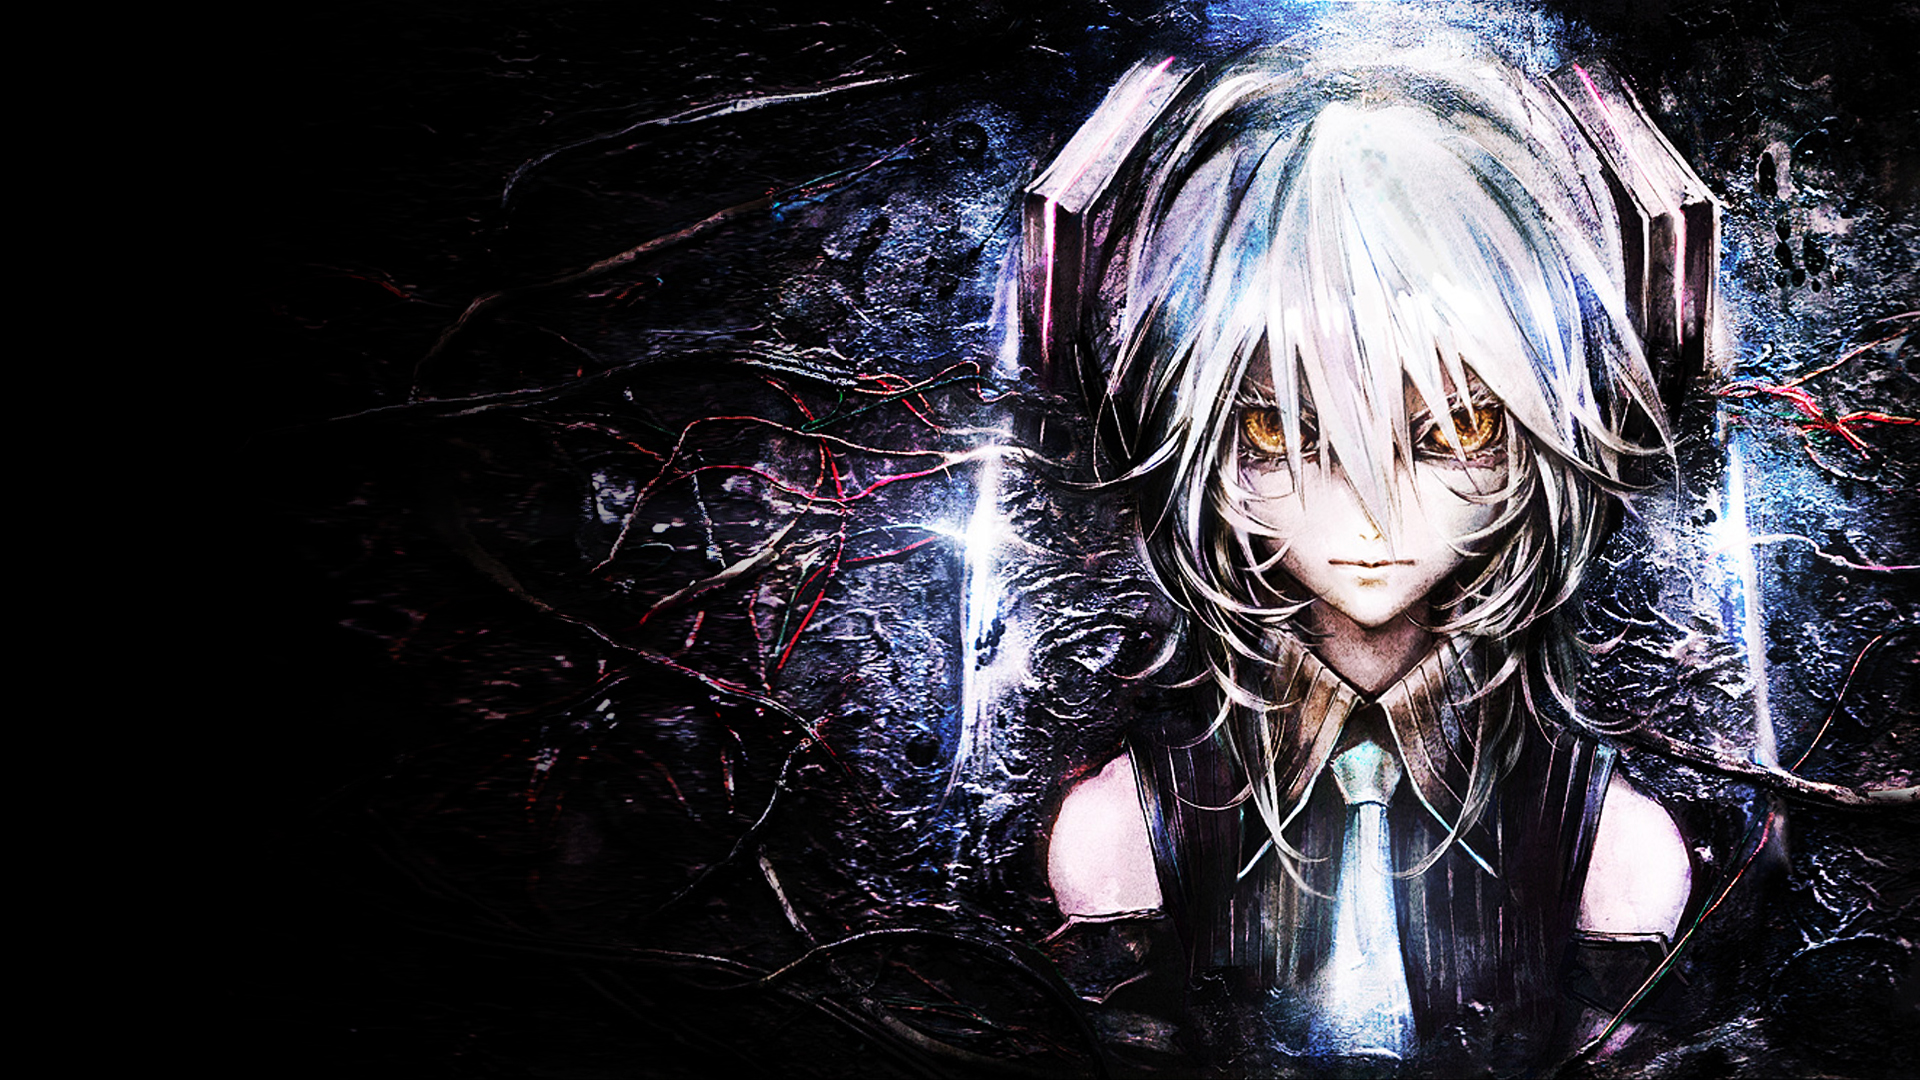 100+ Anime Wallpapers 1920x1080 Part 1  Hd anime wallpapers, Anime music,  Music wallpaper